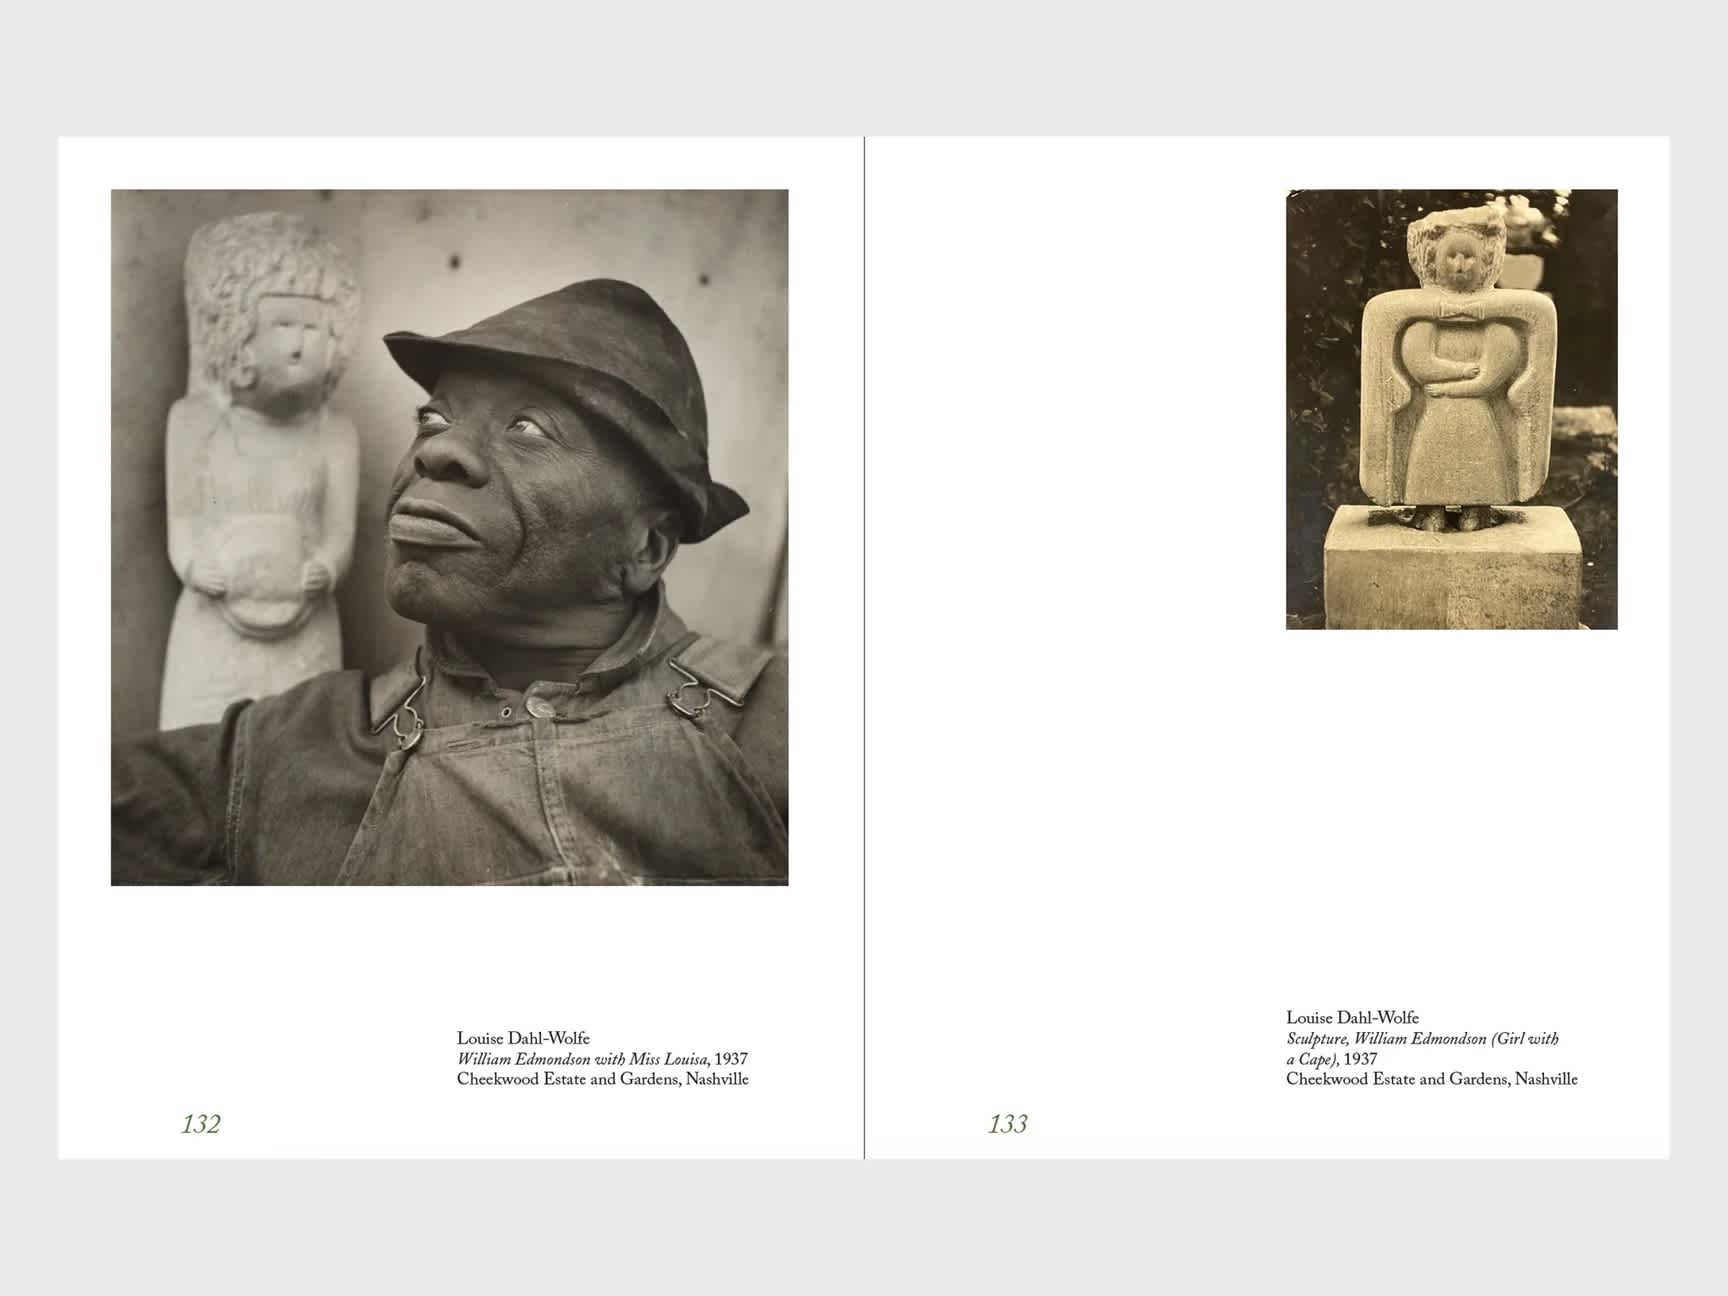 Two page book spread. The left page features a photograph of the sculptor William Edmondson. The image credit sits in the bottom right corner. The second page features a photograph of one of Edmondson's sculpted angels. The image credit also sits in the bottom right corner. 